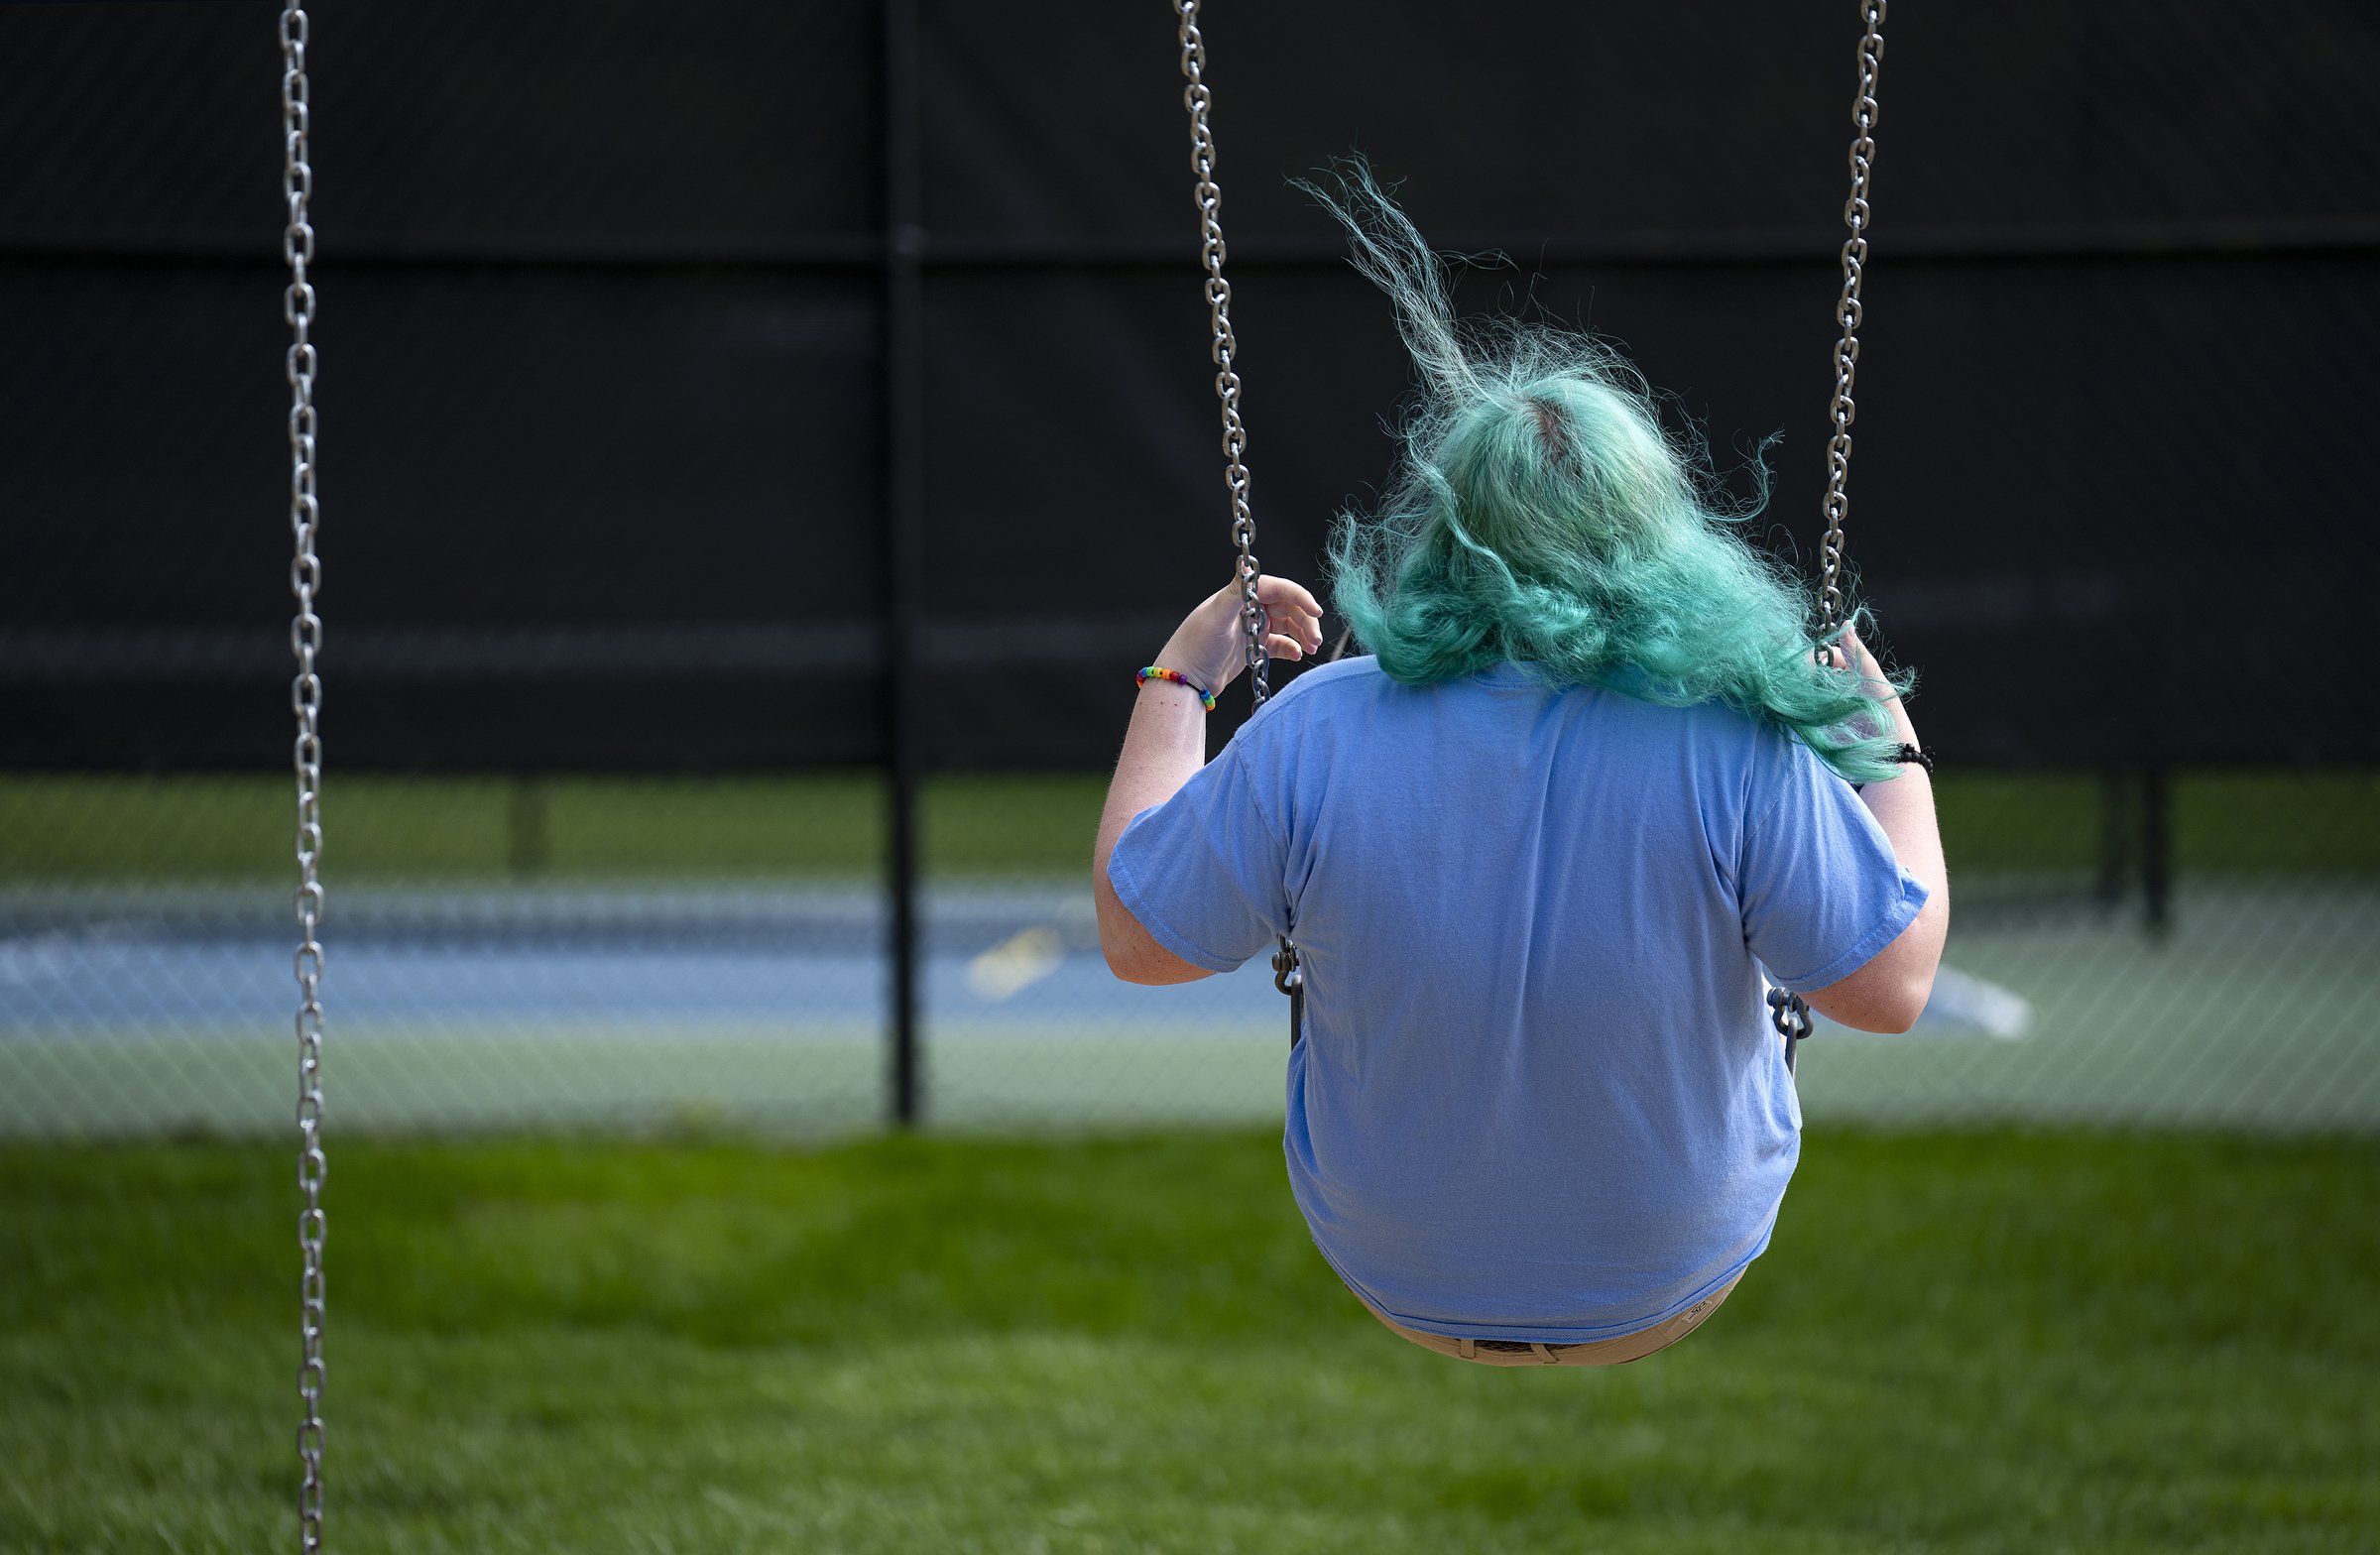  A 16-year-old transgender girl swings in Indianapolis on Thursday, May 11, 2023. She asked to remain anonymous due to safety and privacy concerns. Her family has been rooted in Indianapolis for decades but is considering leaving the state due to rec